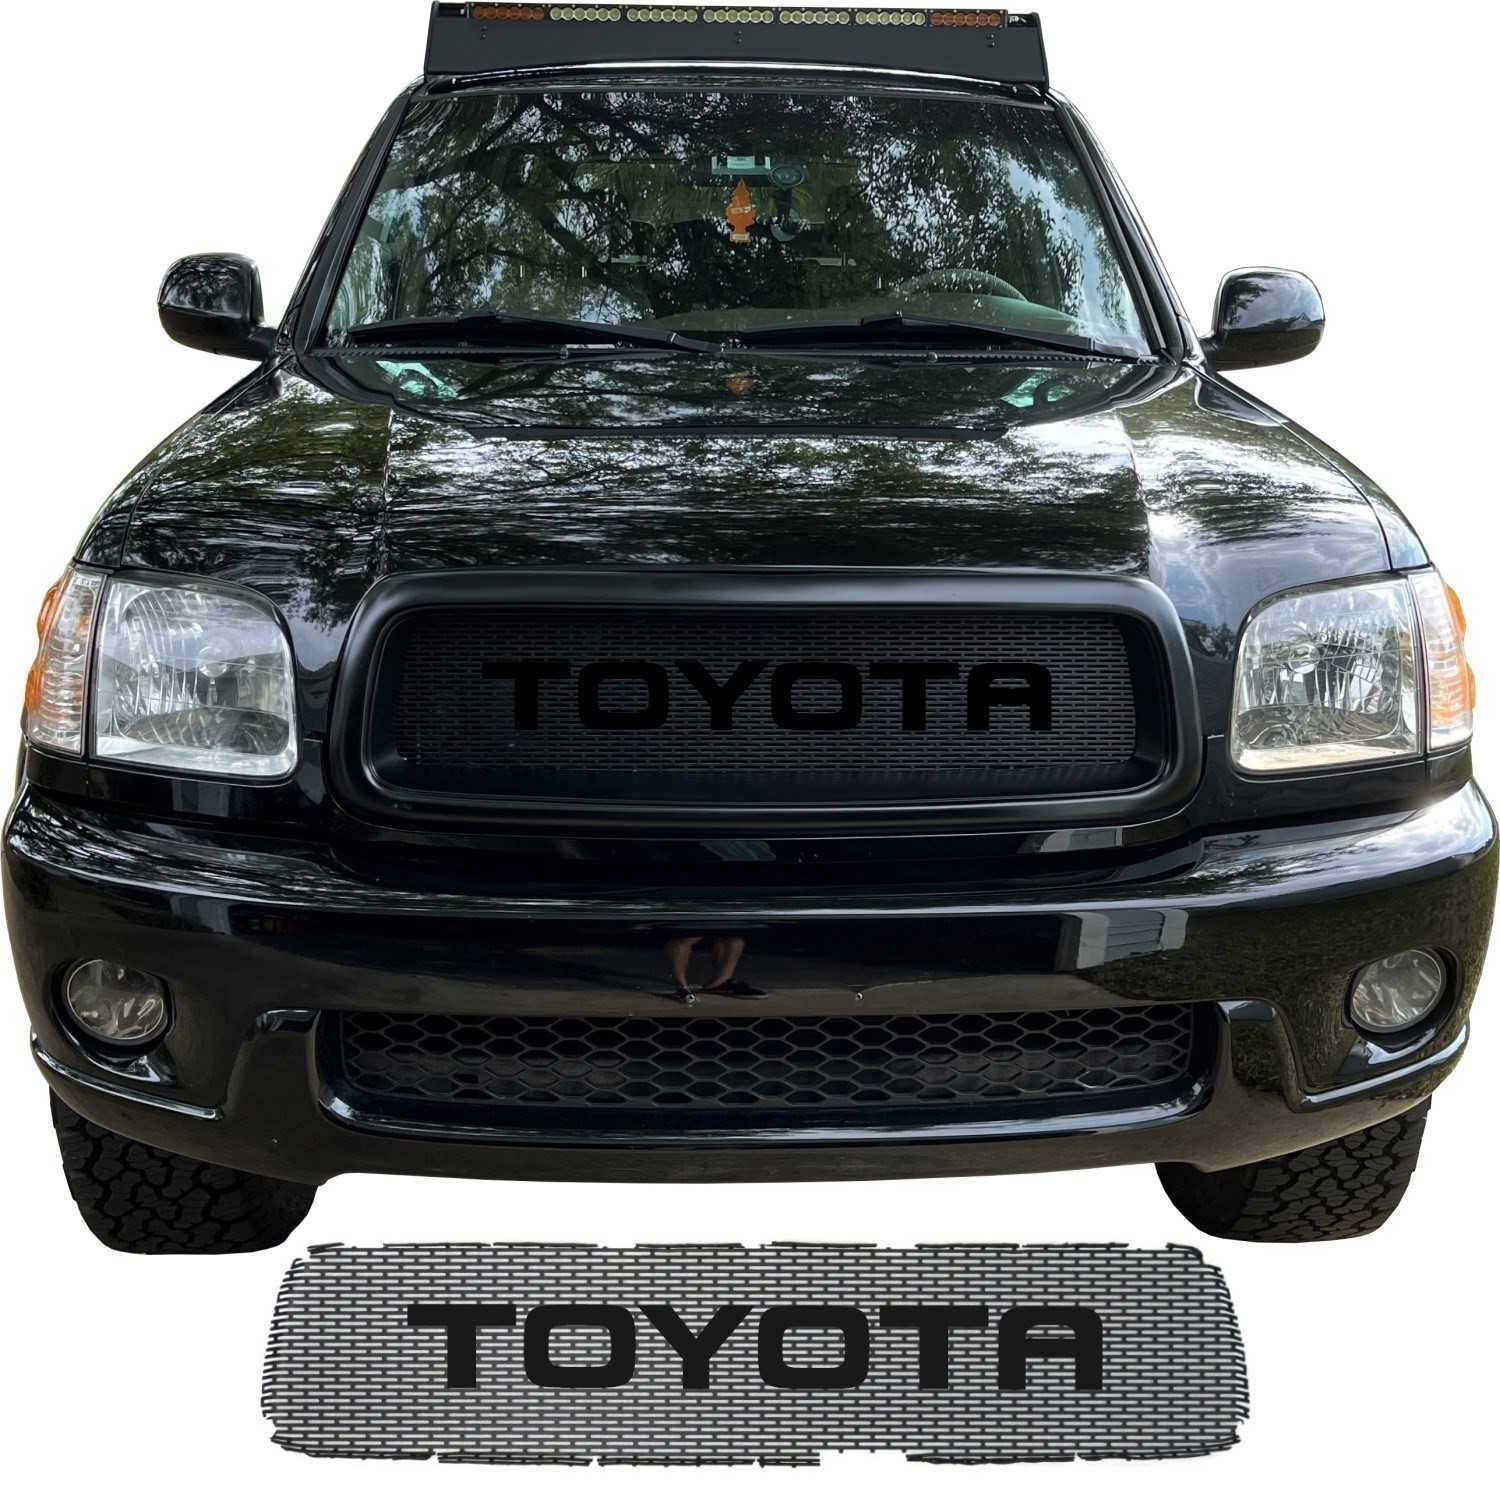 2001 - 2004 Toyota Sequoia Grill Mesh with Big Lettering